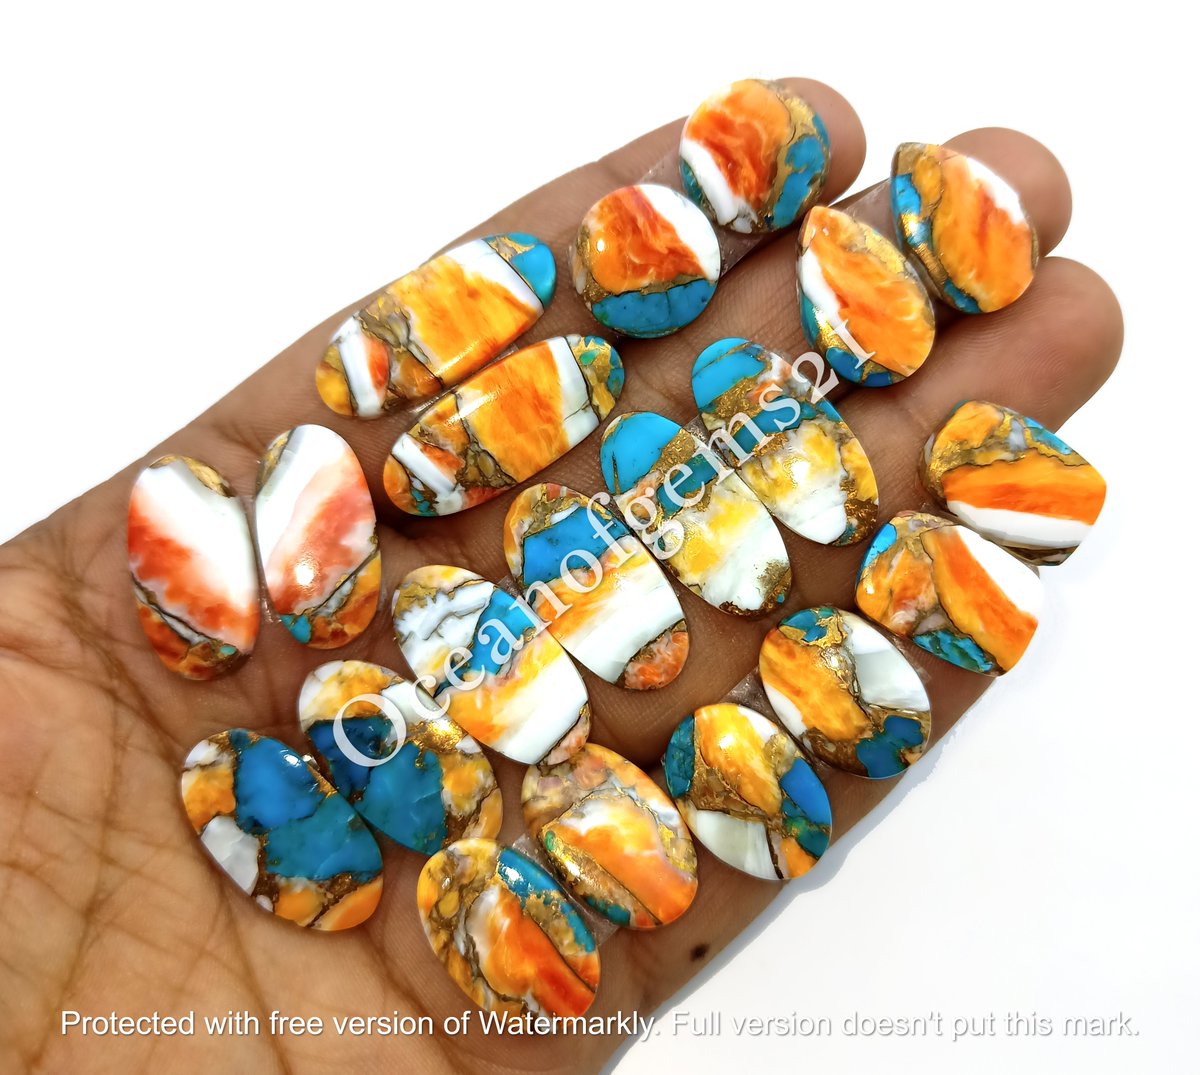 Oyster Copper Mohave Turquoise Pairs Gemstone Cabochon Dm For Price Size 15 to 35mm Approx Free Drilling Service Worldwide Shipping$6 Combined Shipping Available #oysterstone #oystercopper #coppermohave #mohaveturquise #mohave #oysterpair #pairsgemstone #copperjewelry